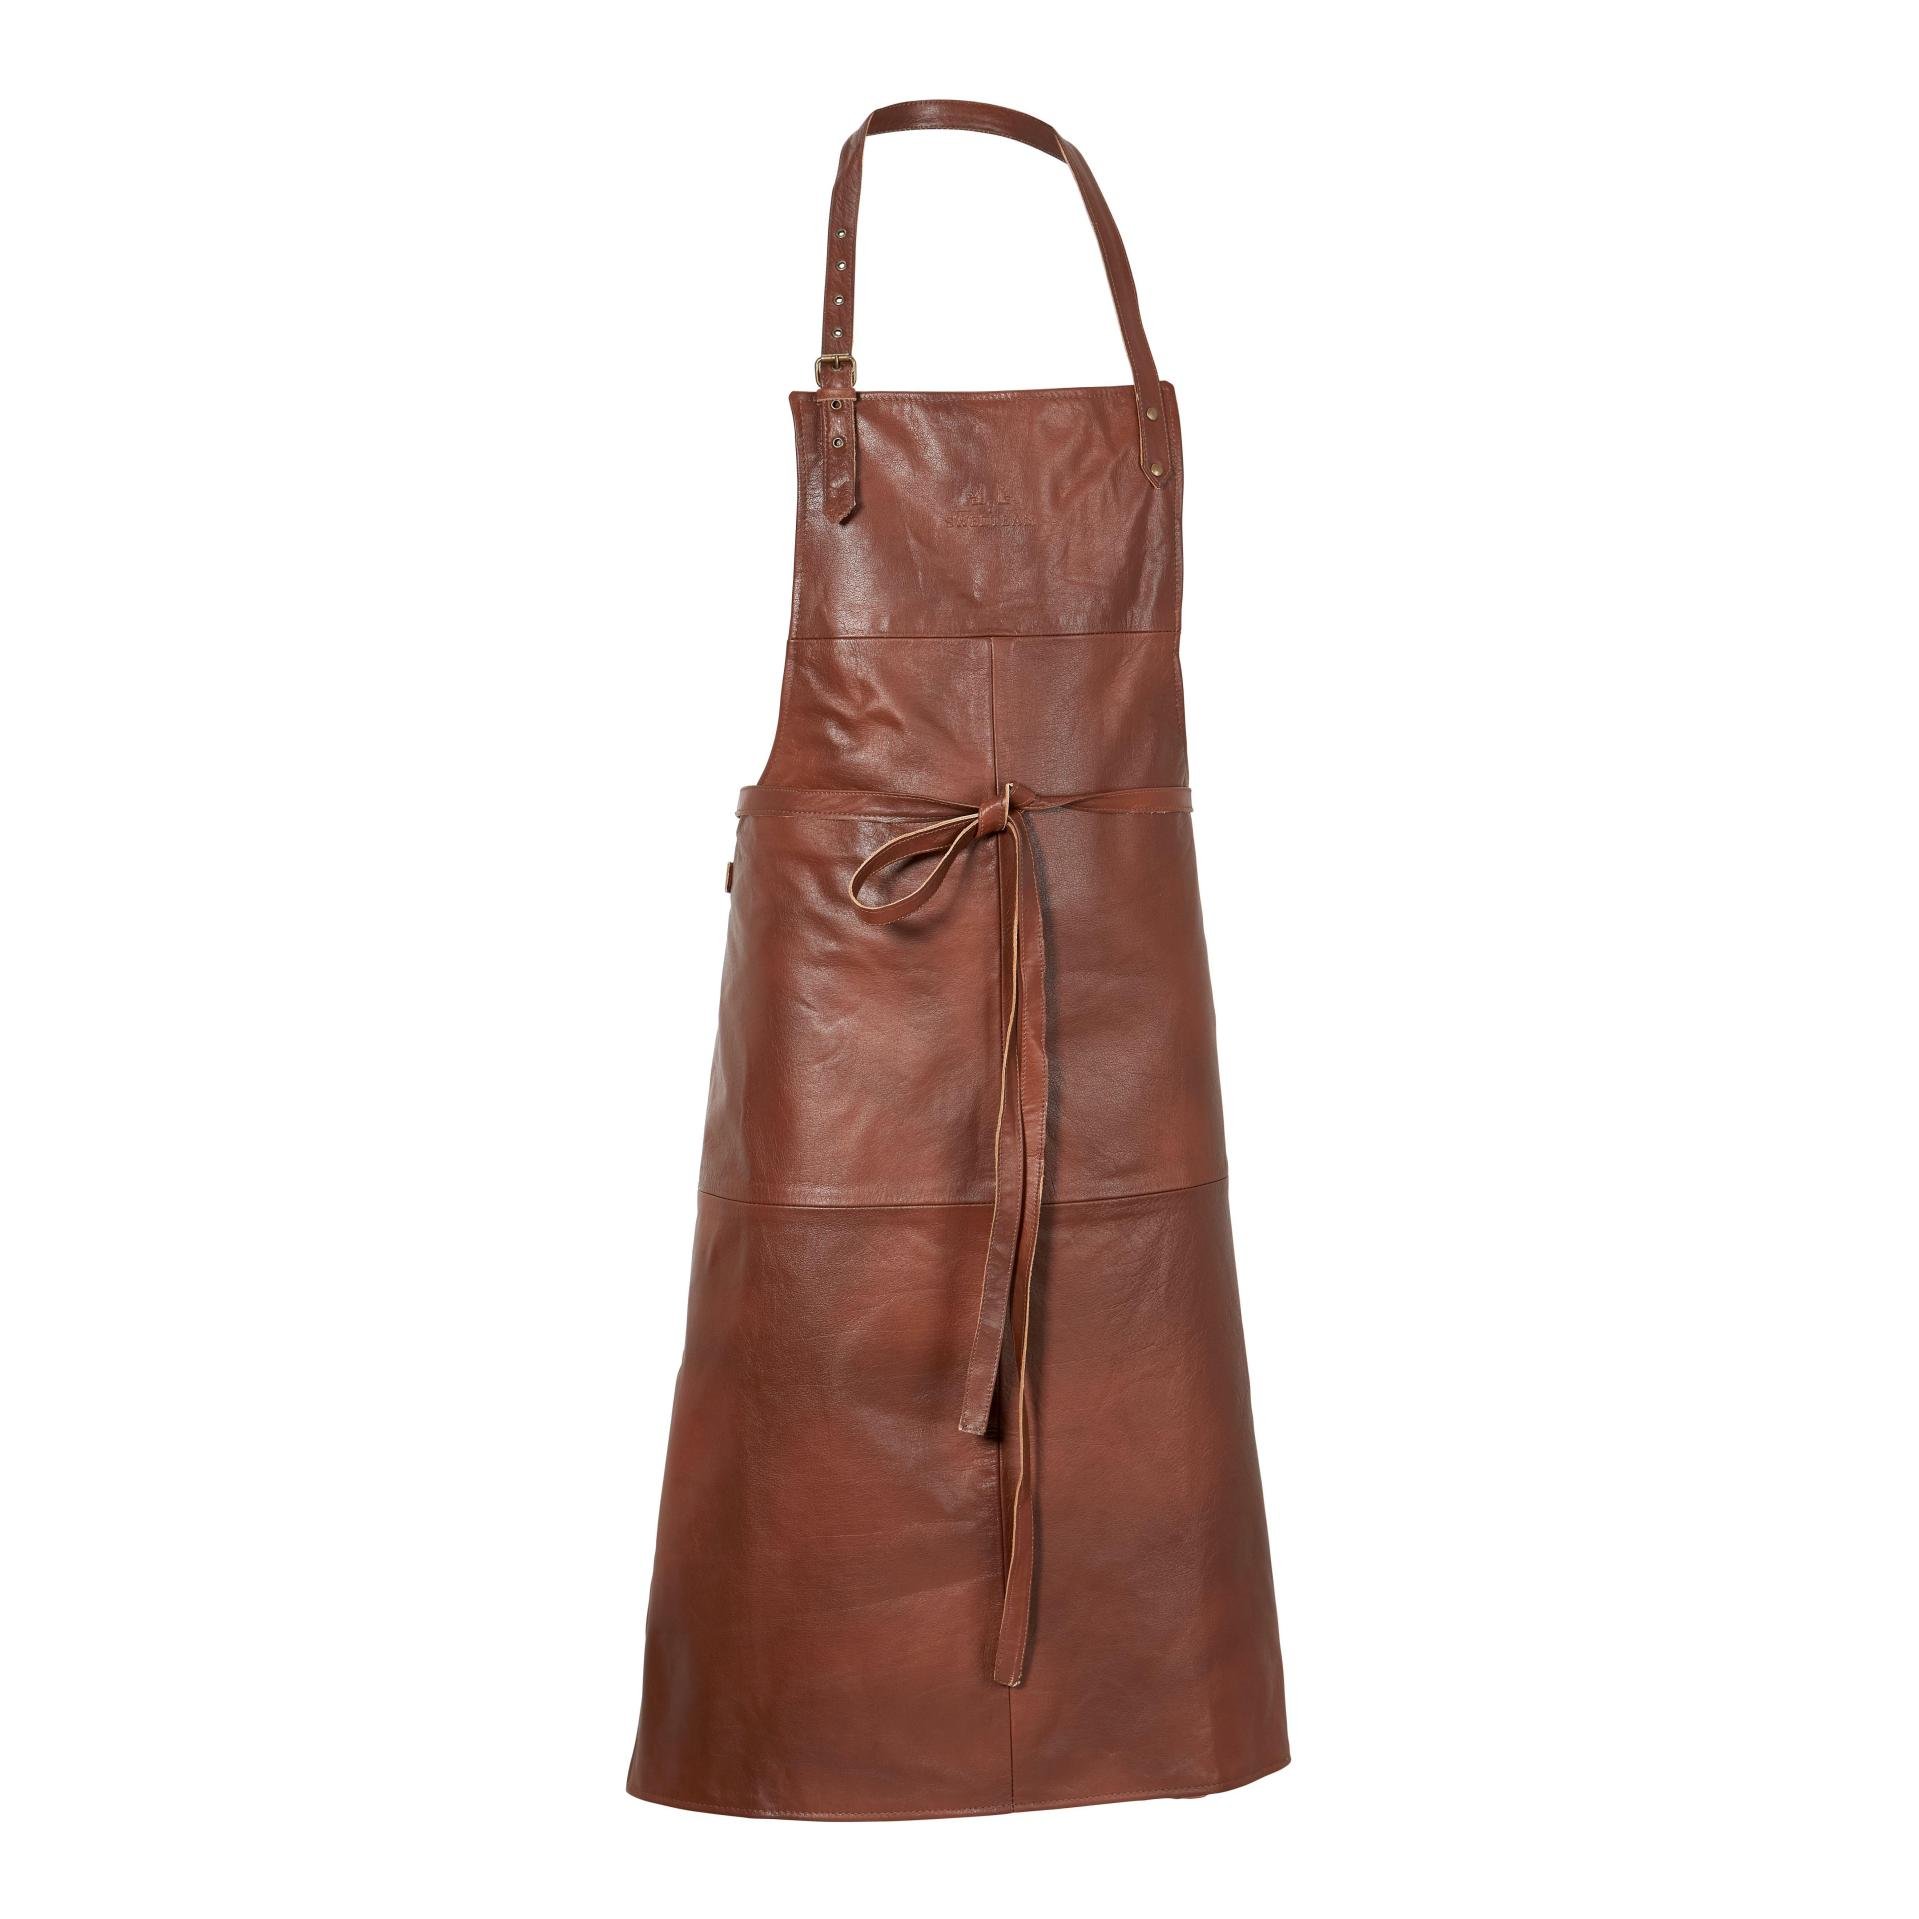 Image of Swedteam Bull Goat Apron Accessories - Light Brown - bei Hauptner.ch